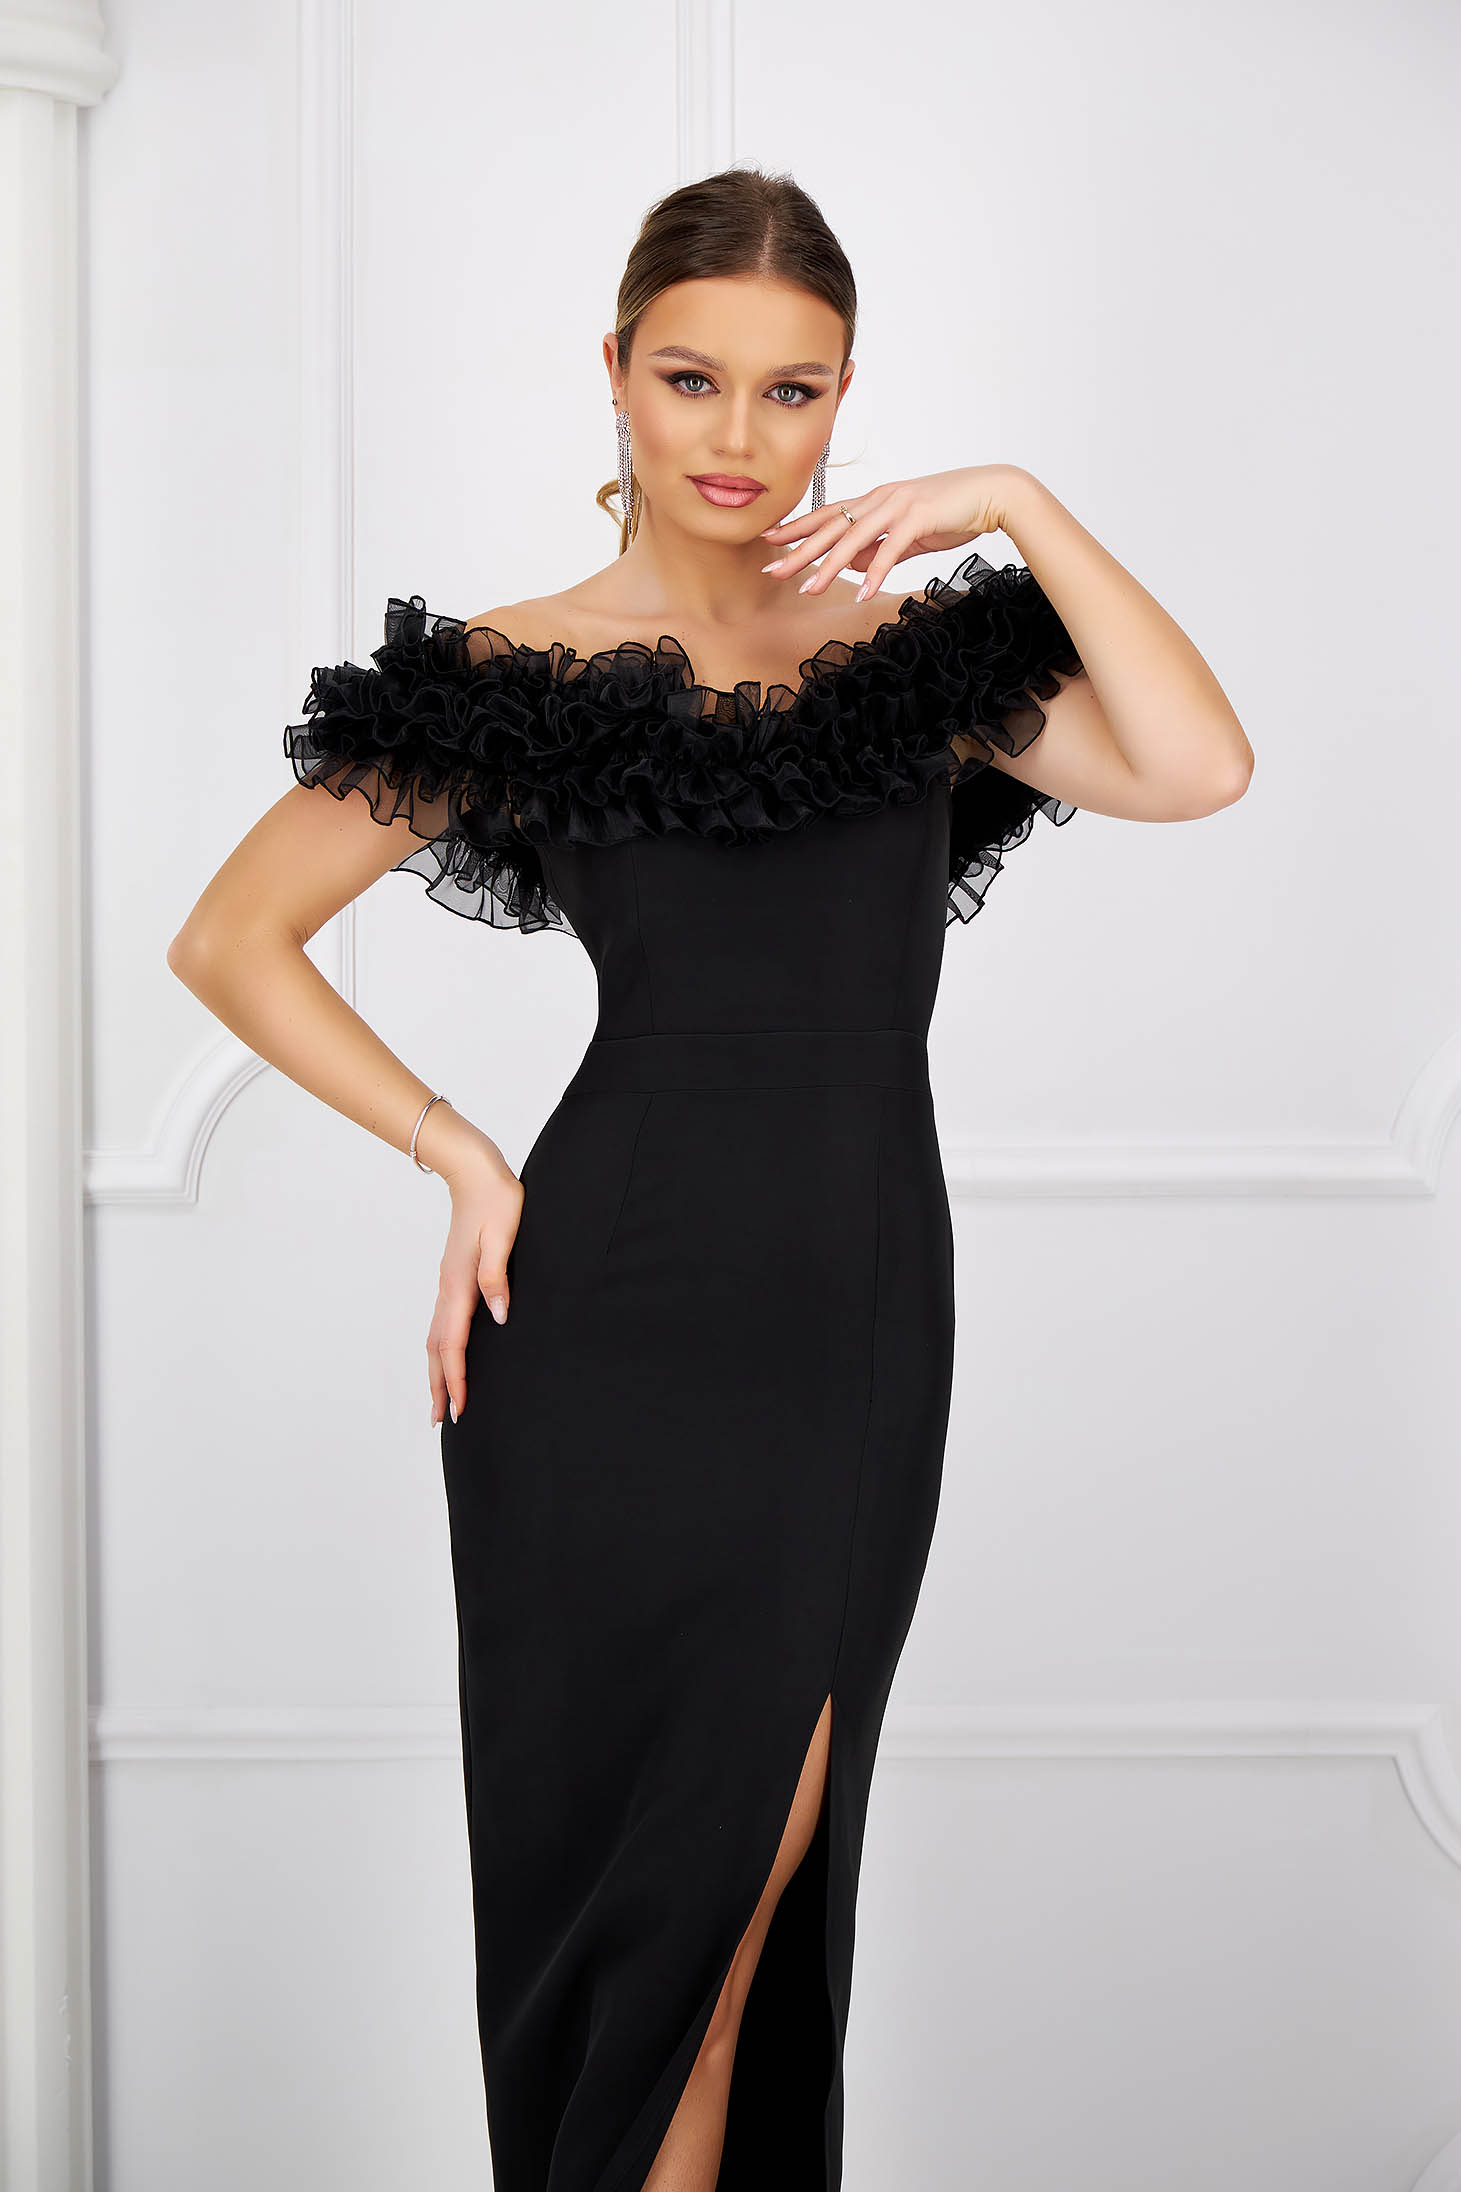 Black dress long cloth with ruffle details cut material naked shoulders